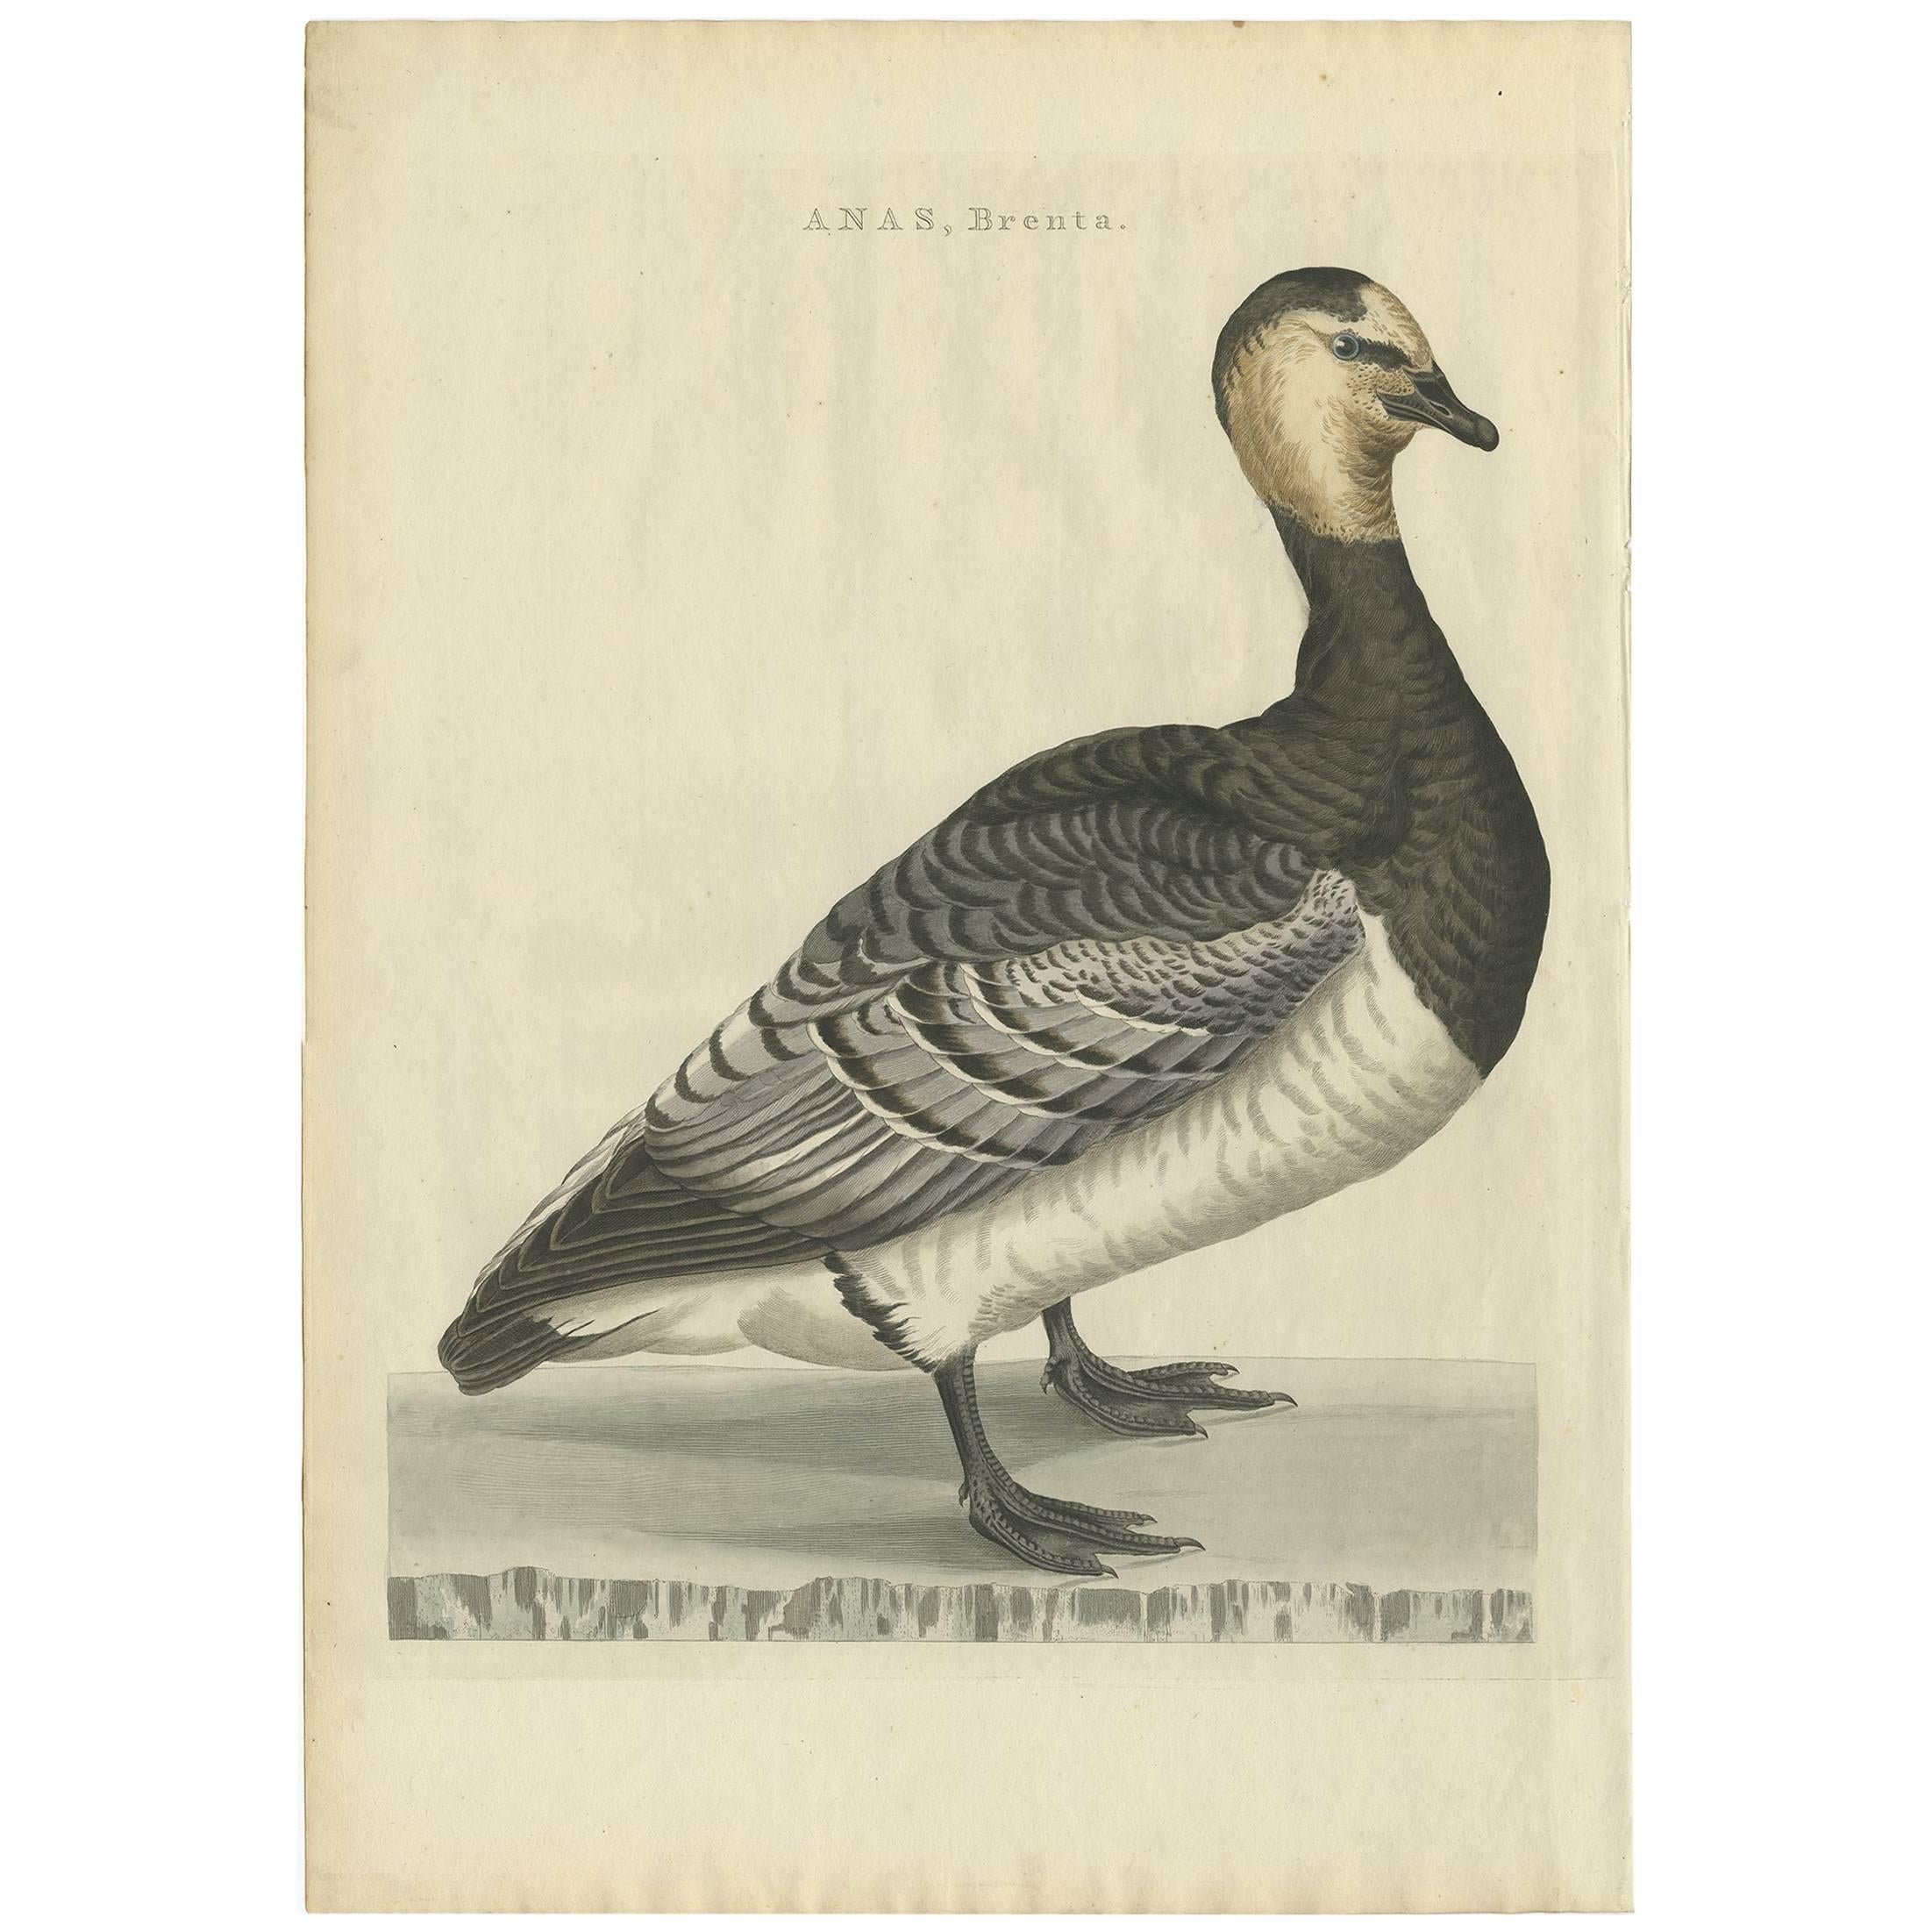 Antique Bird Print of the Barnacle Goose by Sepp & Nozeman, 1797